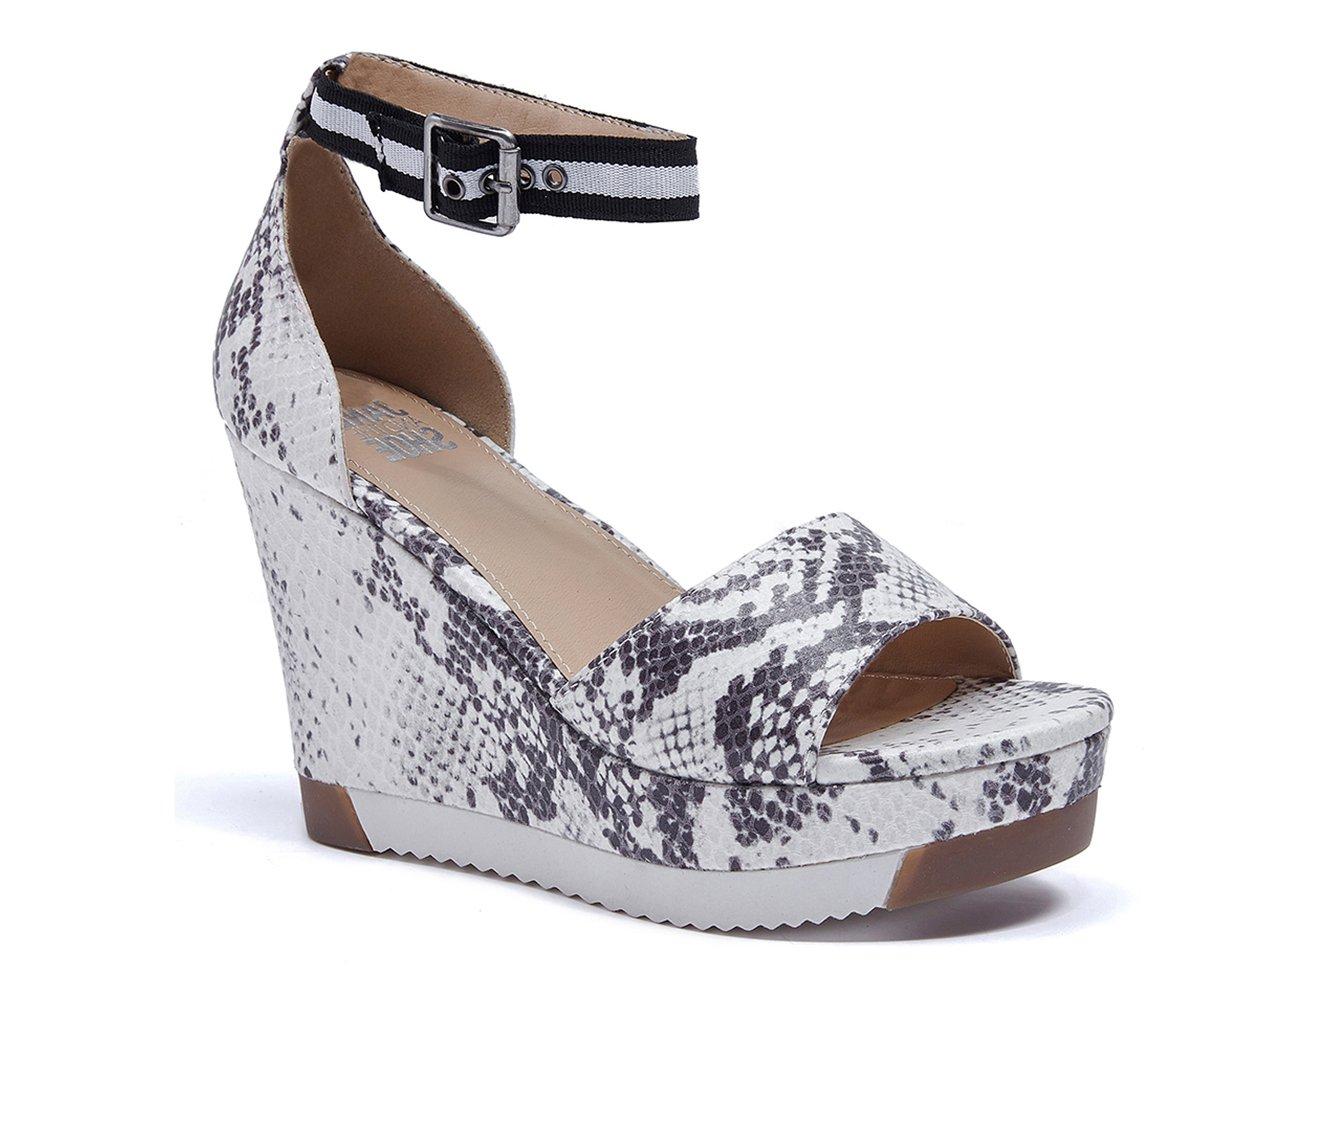 Women's Jane And The Shoe Aira Platform Wedges